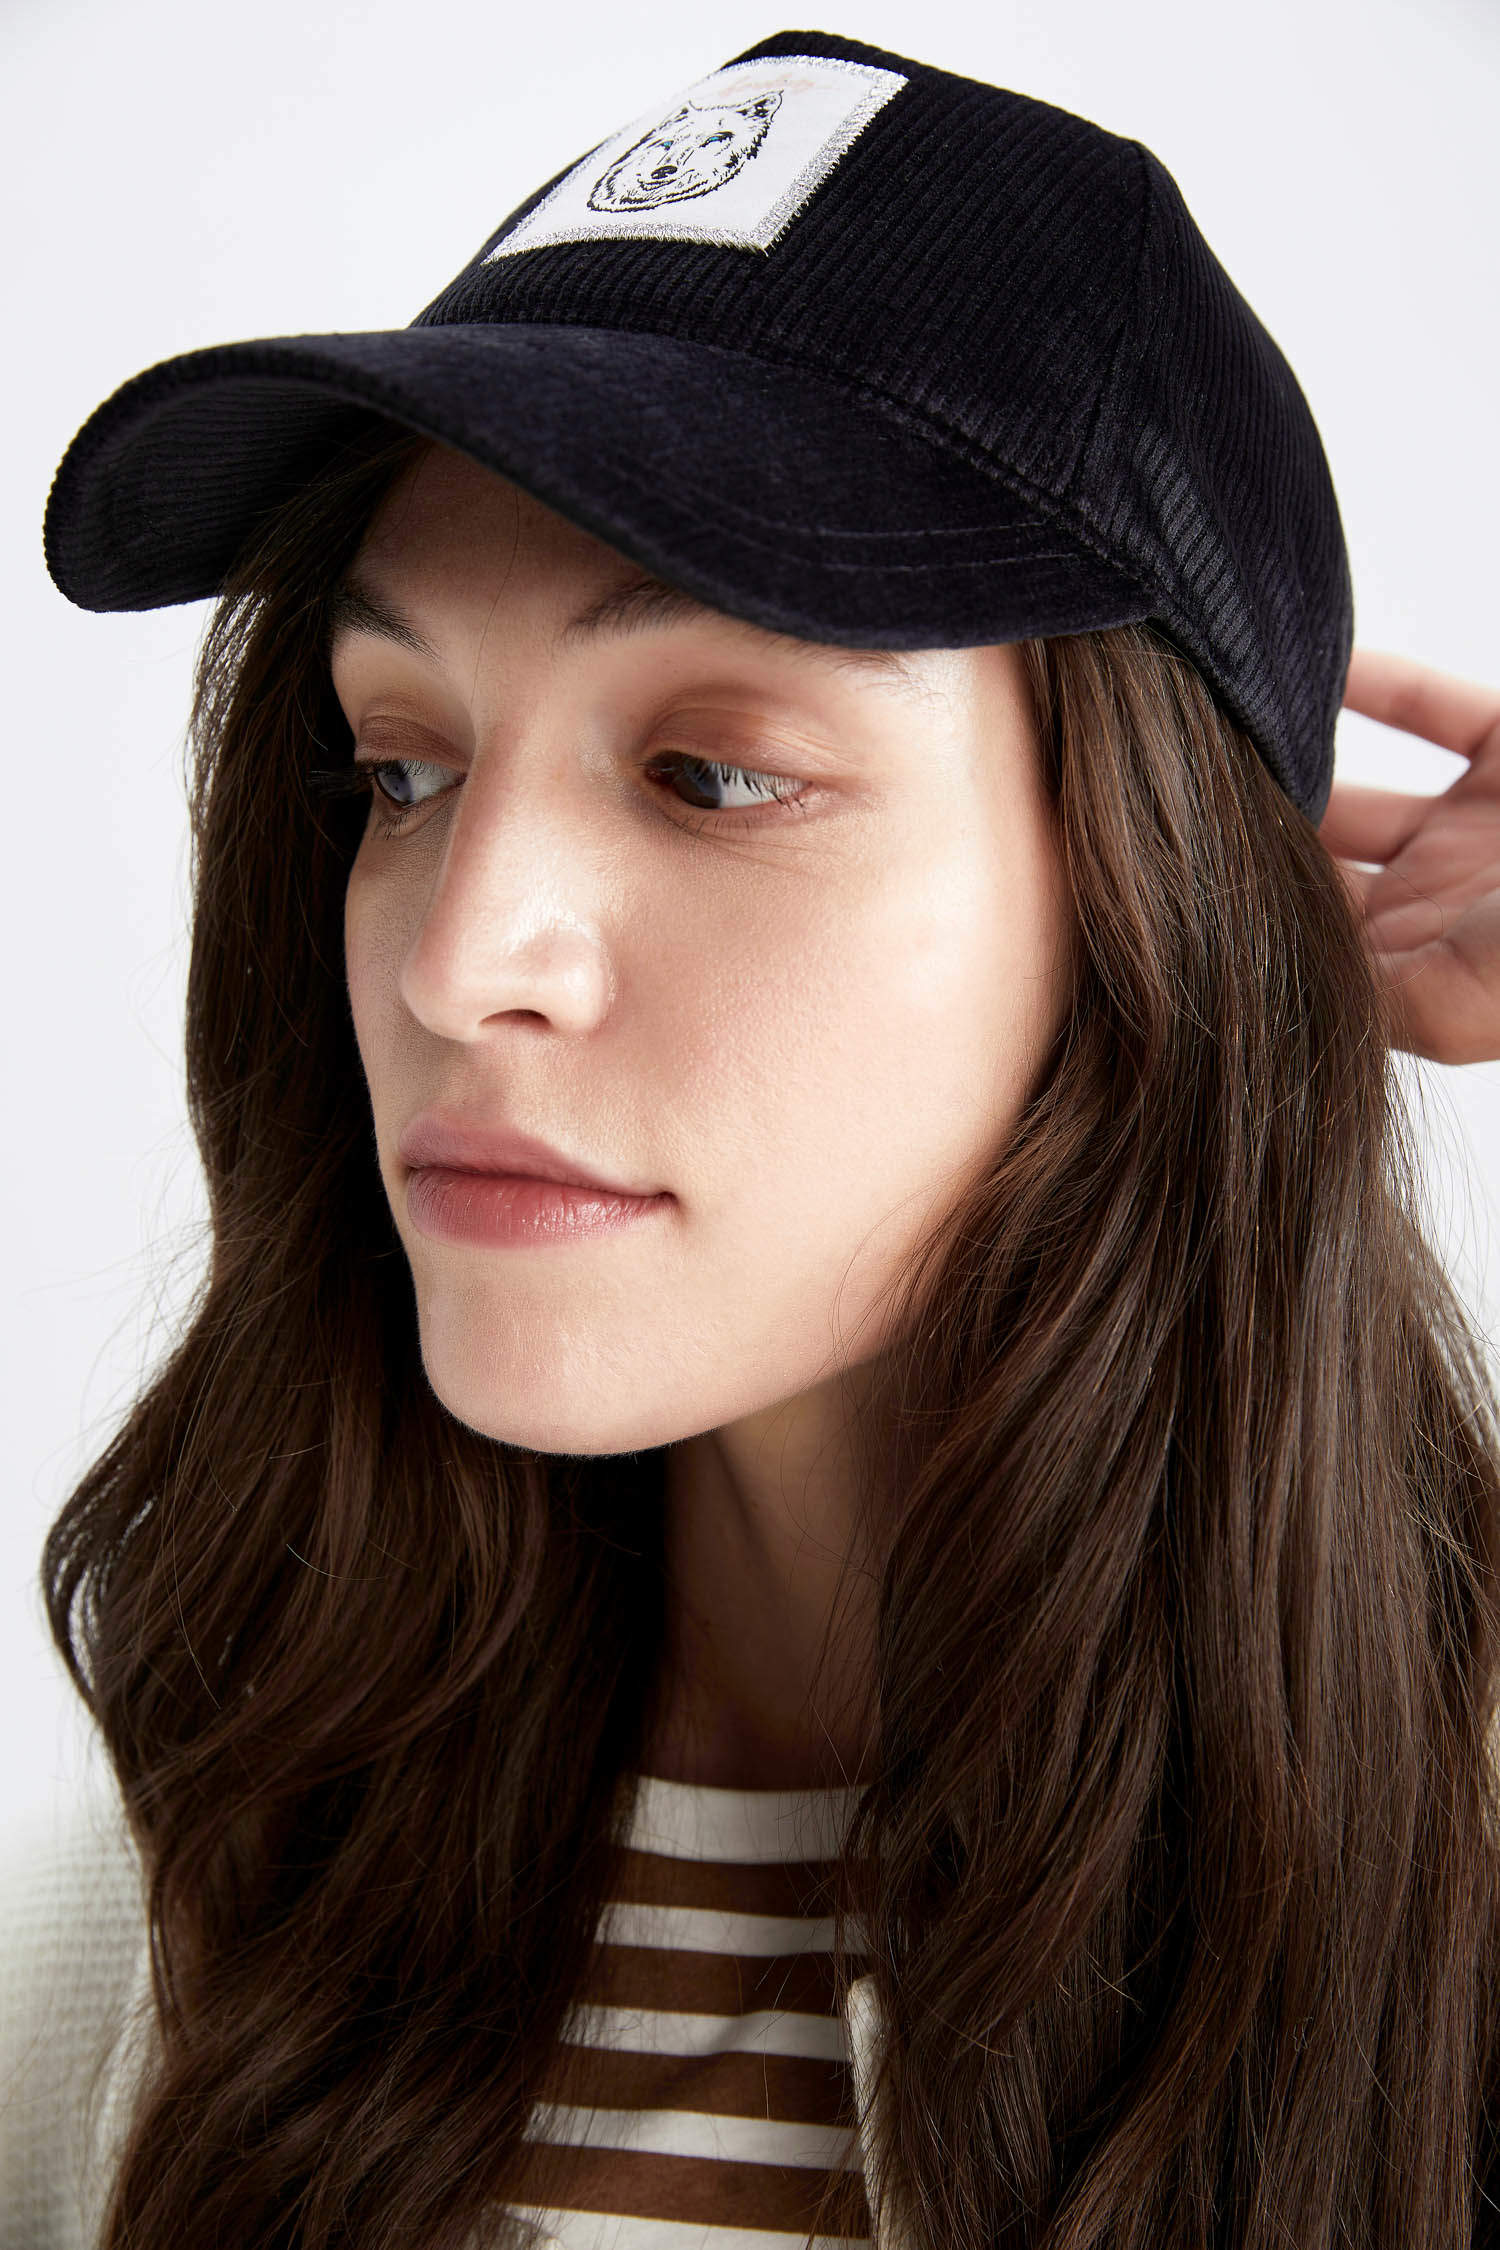 Extra Innings - Casquette pour Femme